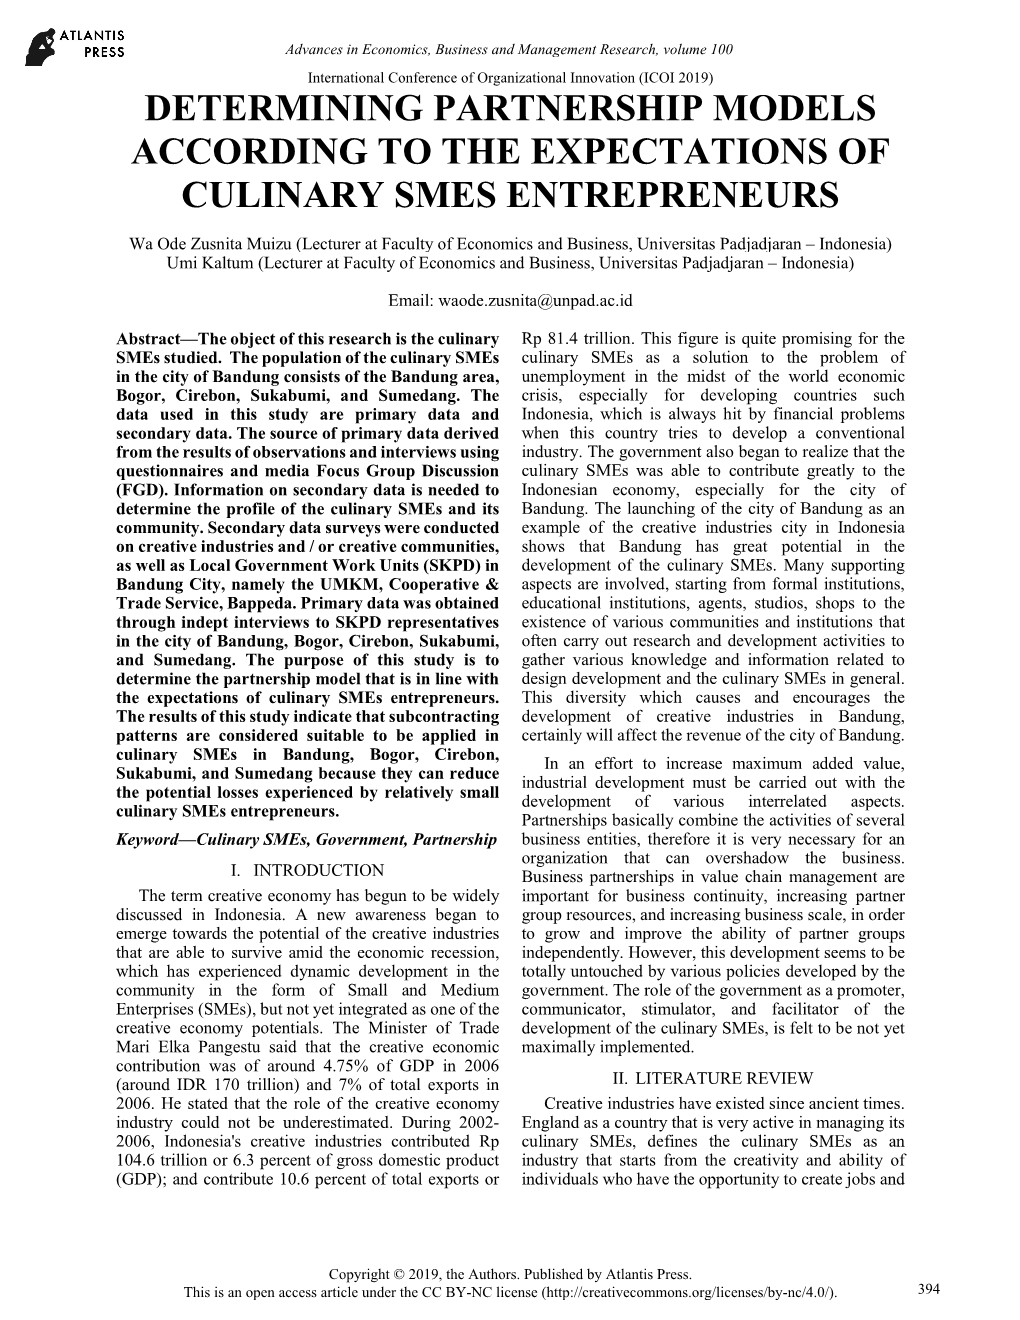 Determining Partnership Models According to the Expectations of Culinary Smes Entrepreneurs